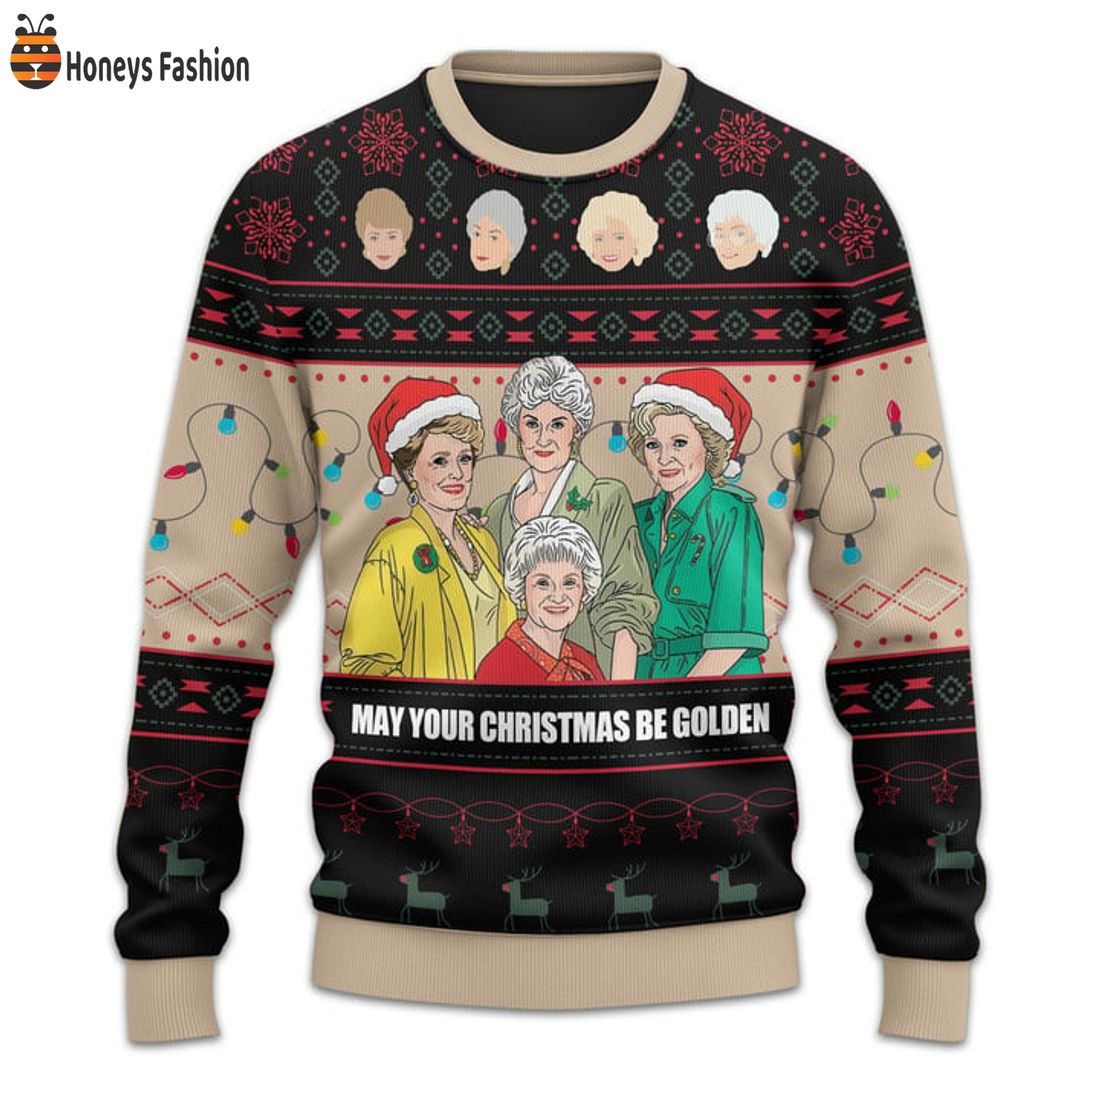 TRENDING The Golden Girls Santa Hat May Your Christmas Be Golden Ugly Christmas Sweater